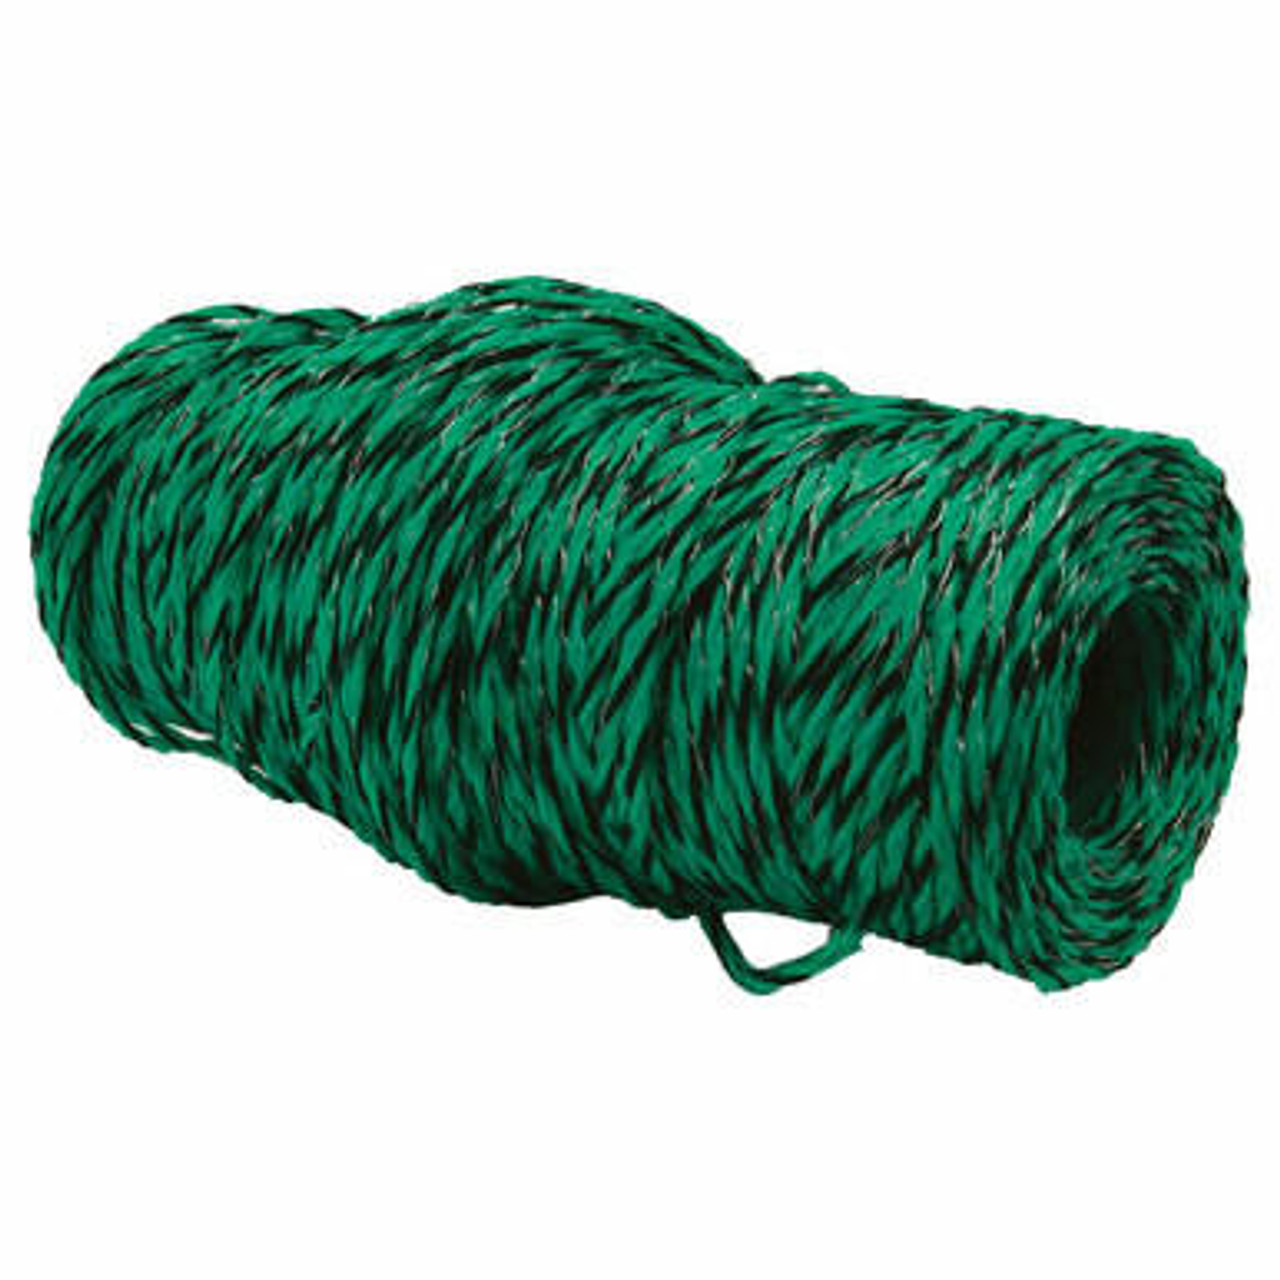 656 ft Polywire Electric Fence, 6 Strand - Green and Black by Stromberg's